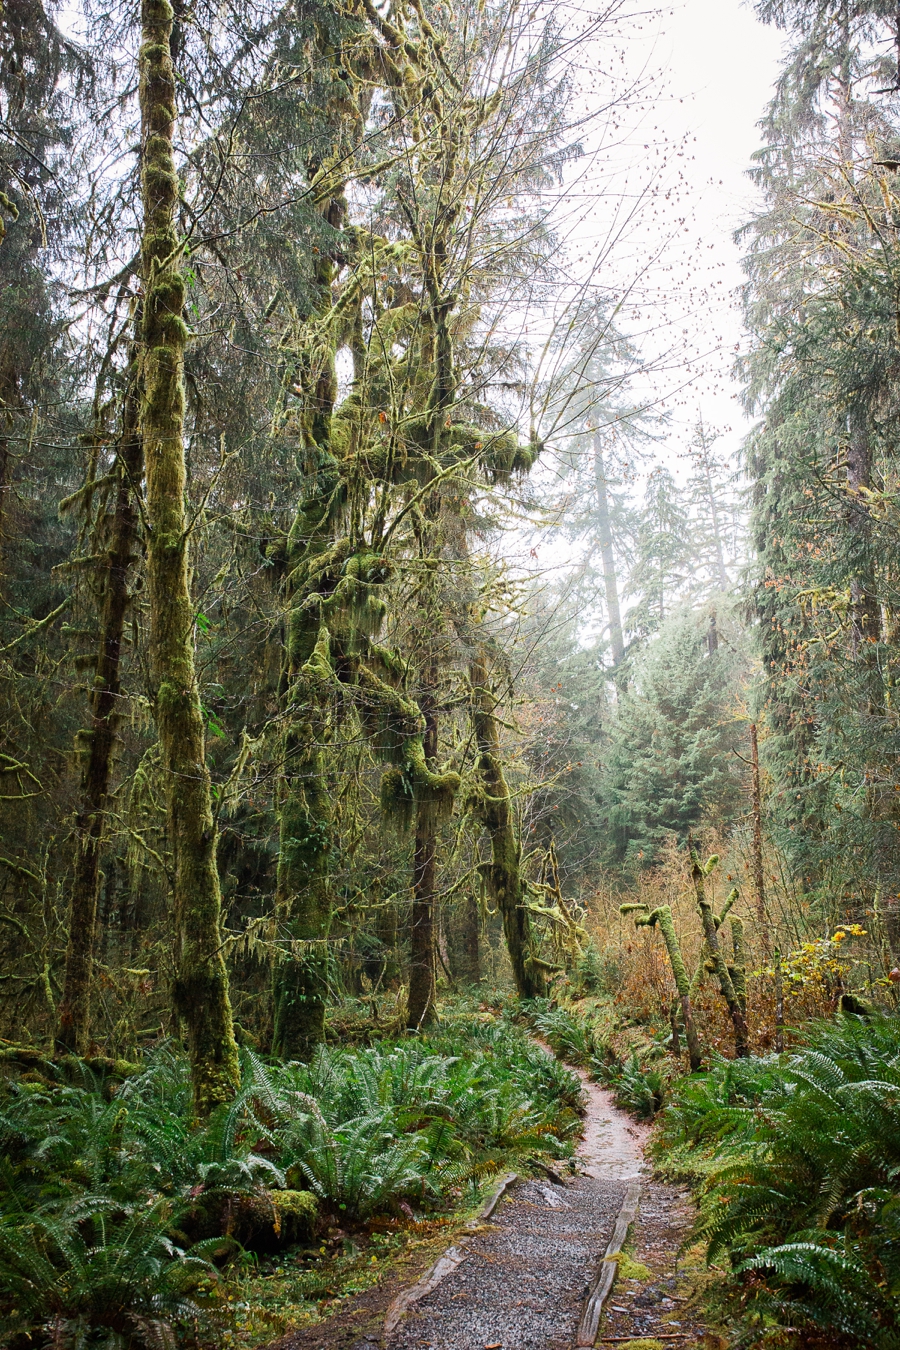 The Hoh Rainforest is one of the best places to elope in Washington state